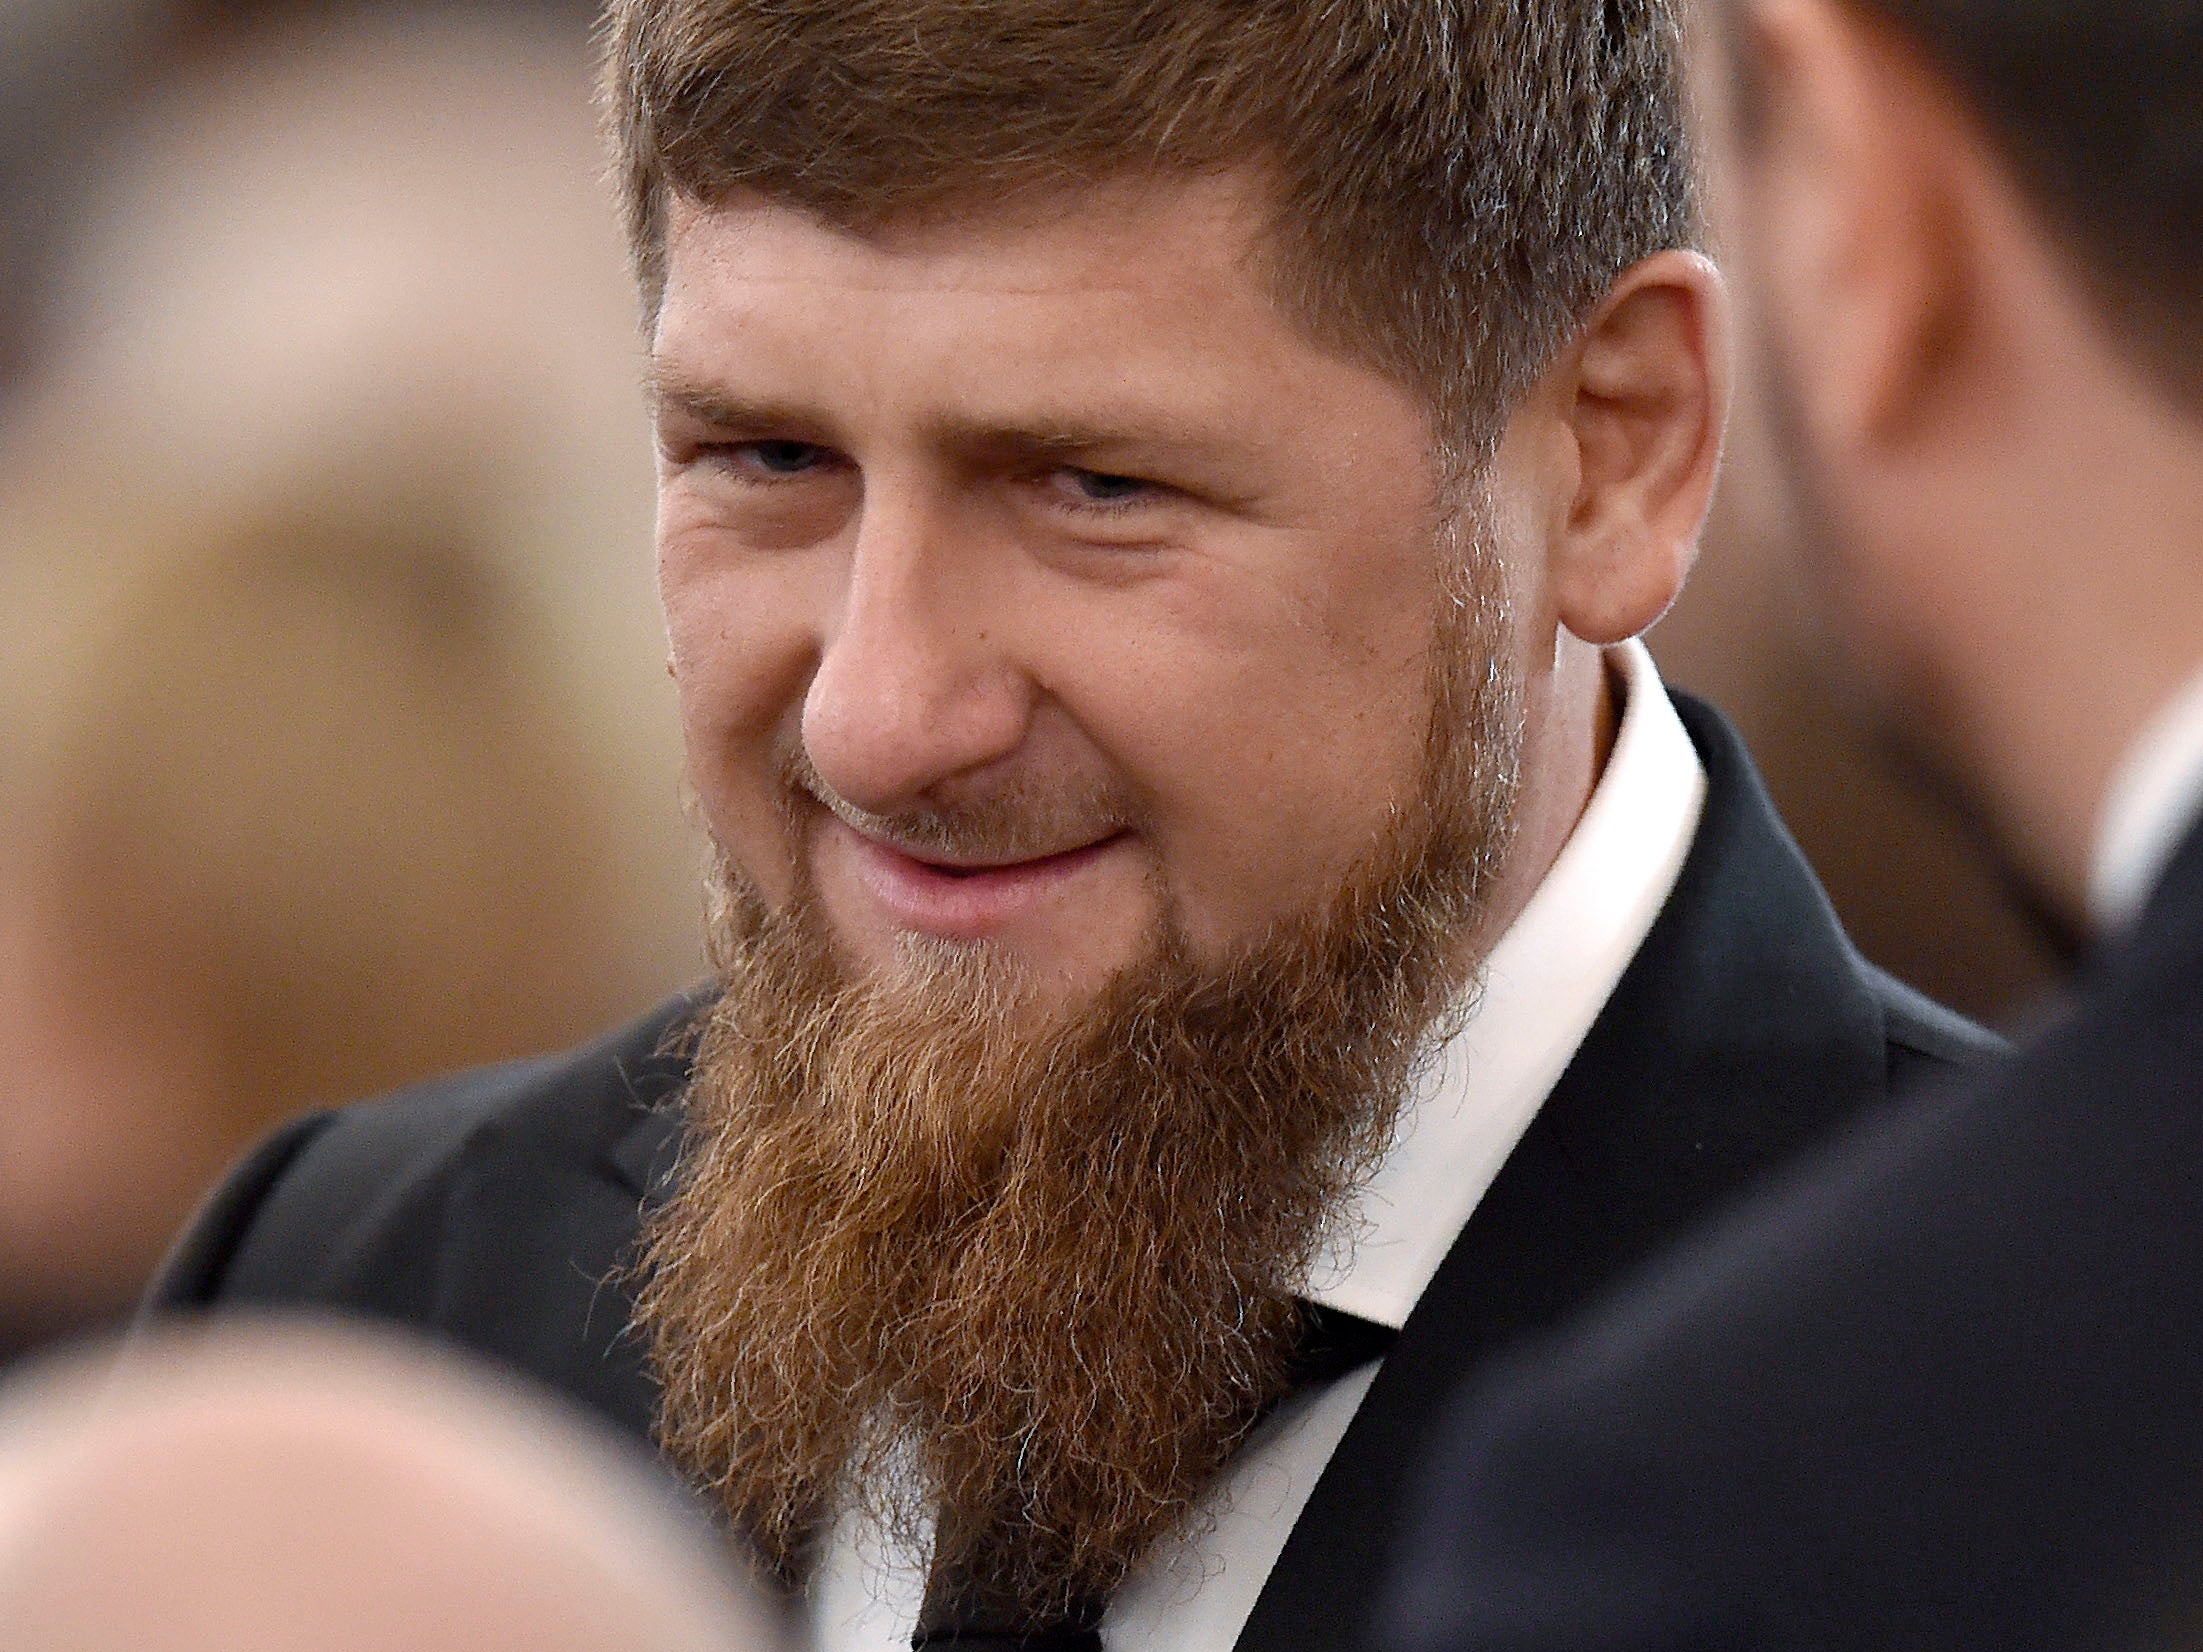 Hundreds of divorced couples reportedly got back together after Chechnya's leader Ramzan Kadyrov launched his family reconciliation initiative in June